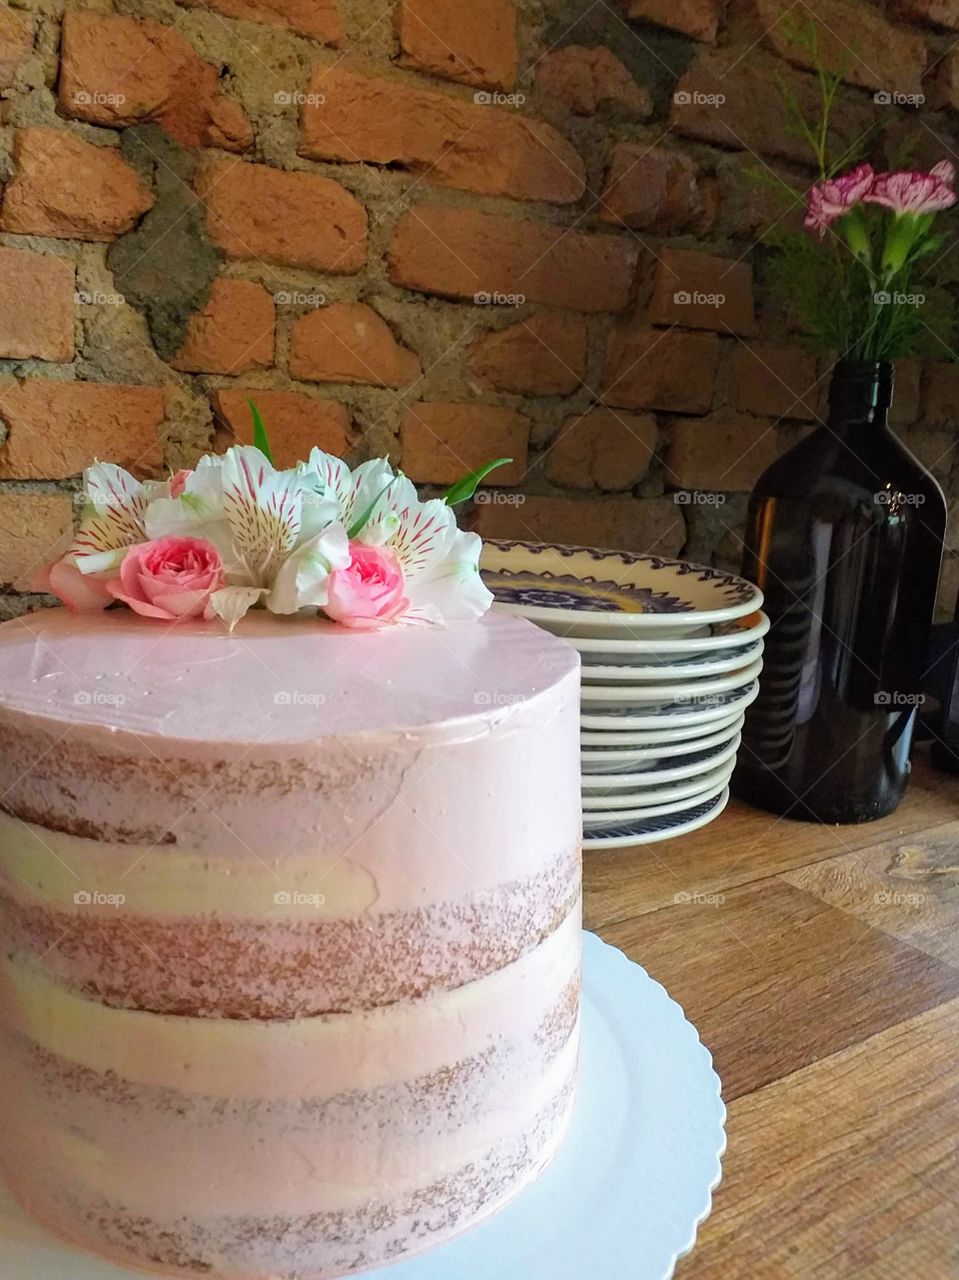 Delicious beautifully decorated birthday cake